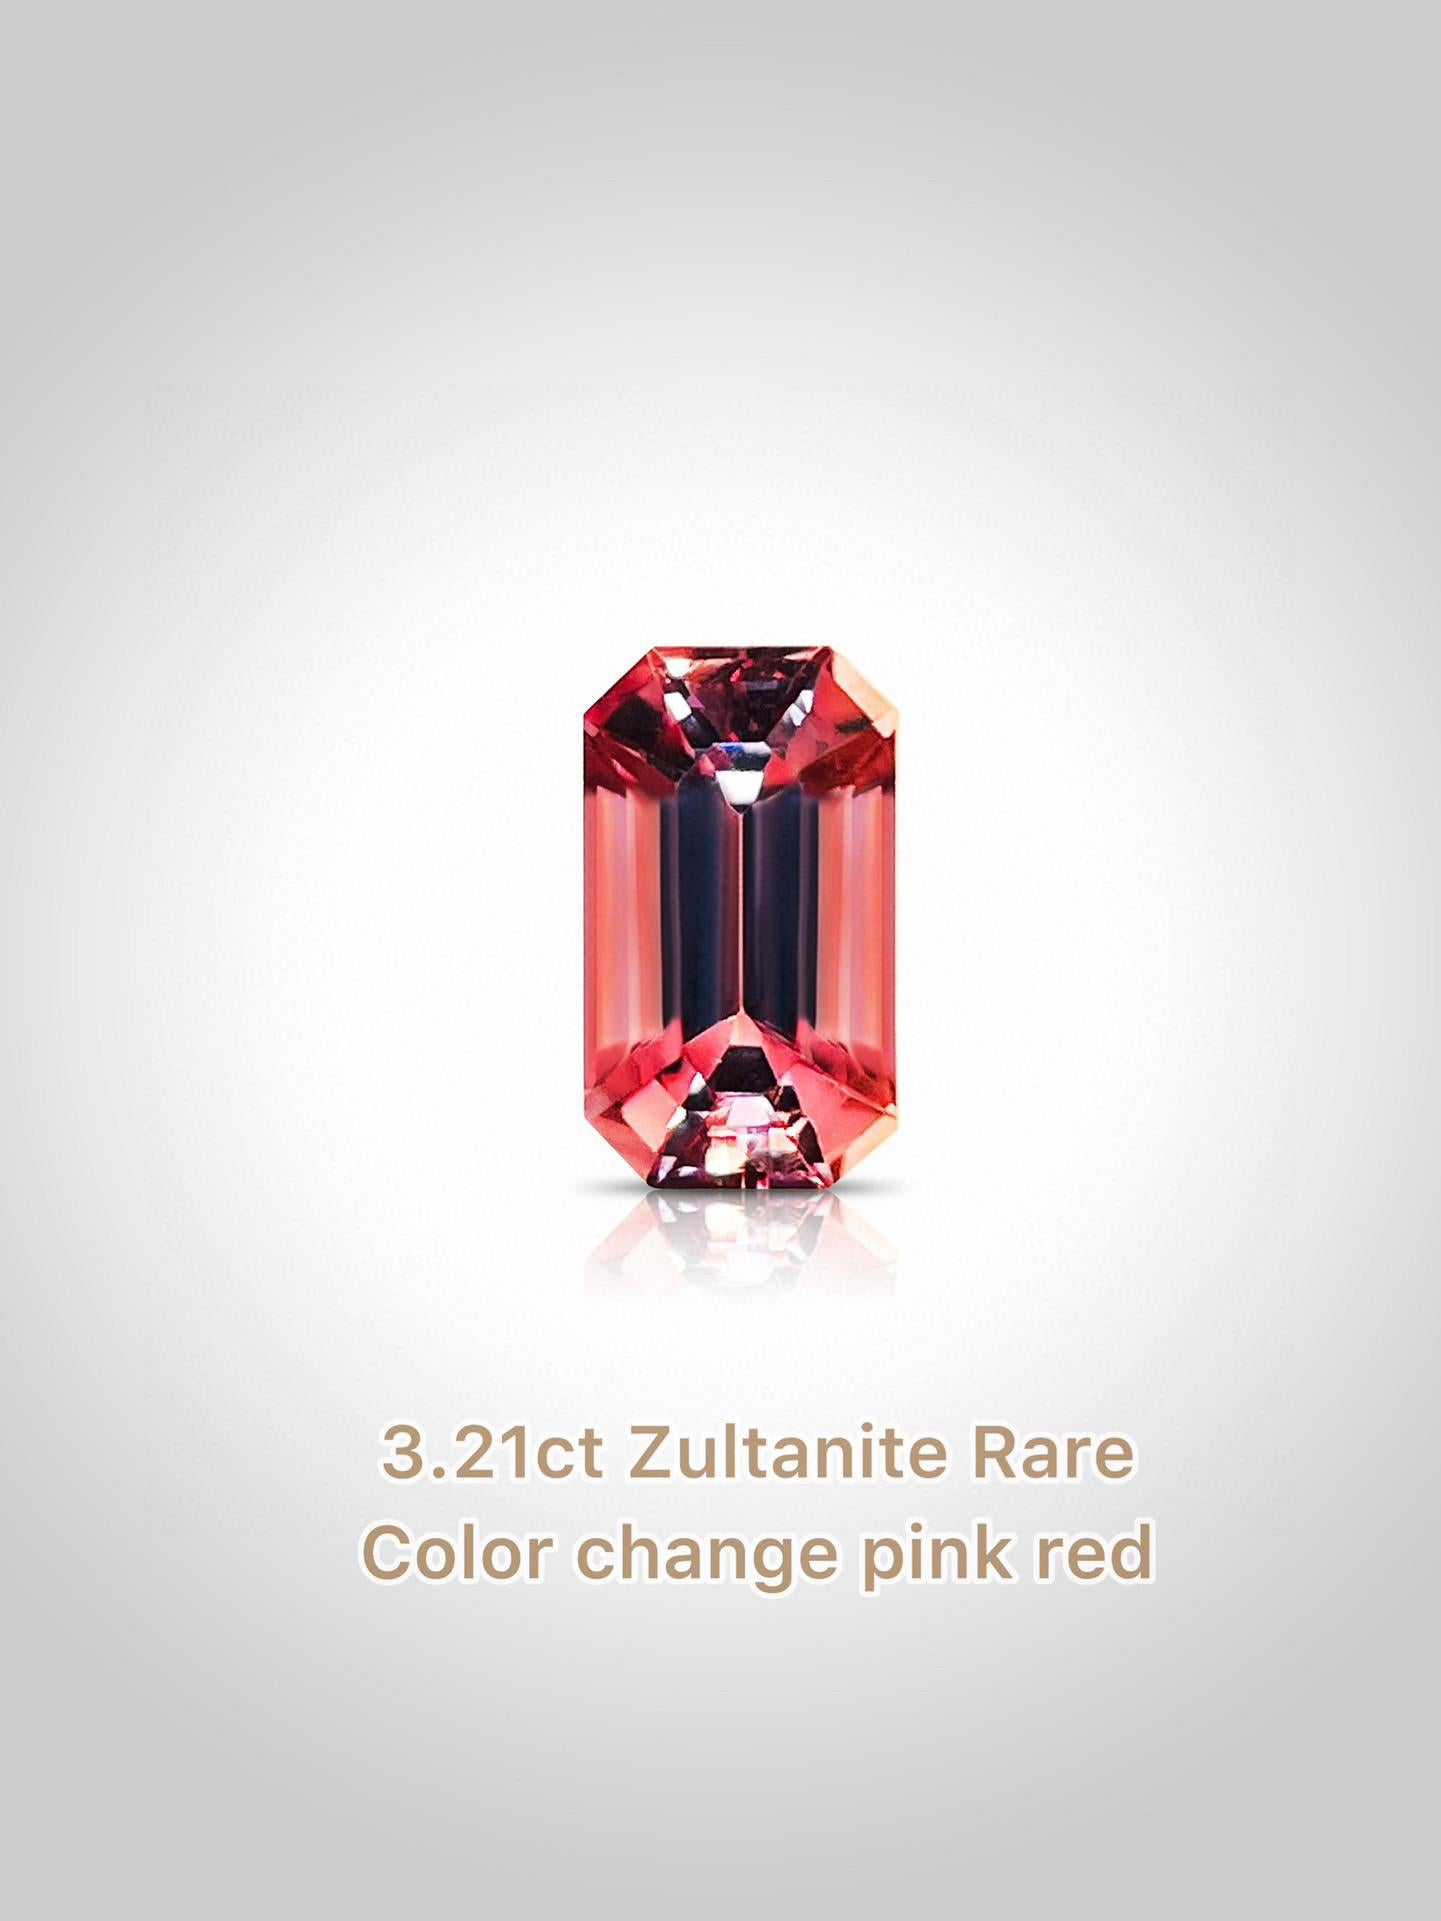 Pink diaspore zultanite color change gemstone pink change to red from turkey clean perfect emerald cutting 
 DSA07

Name: pink diaspore / zultanite 
Weight: 3.21carat 
Color: pink brown color change to red 
Origin: Tanzania 
Size:  10.8*6.4
Clarity: